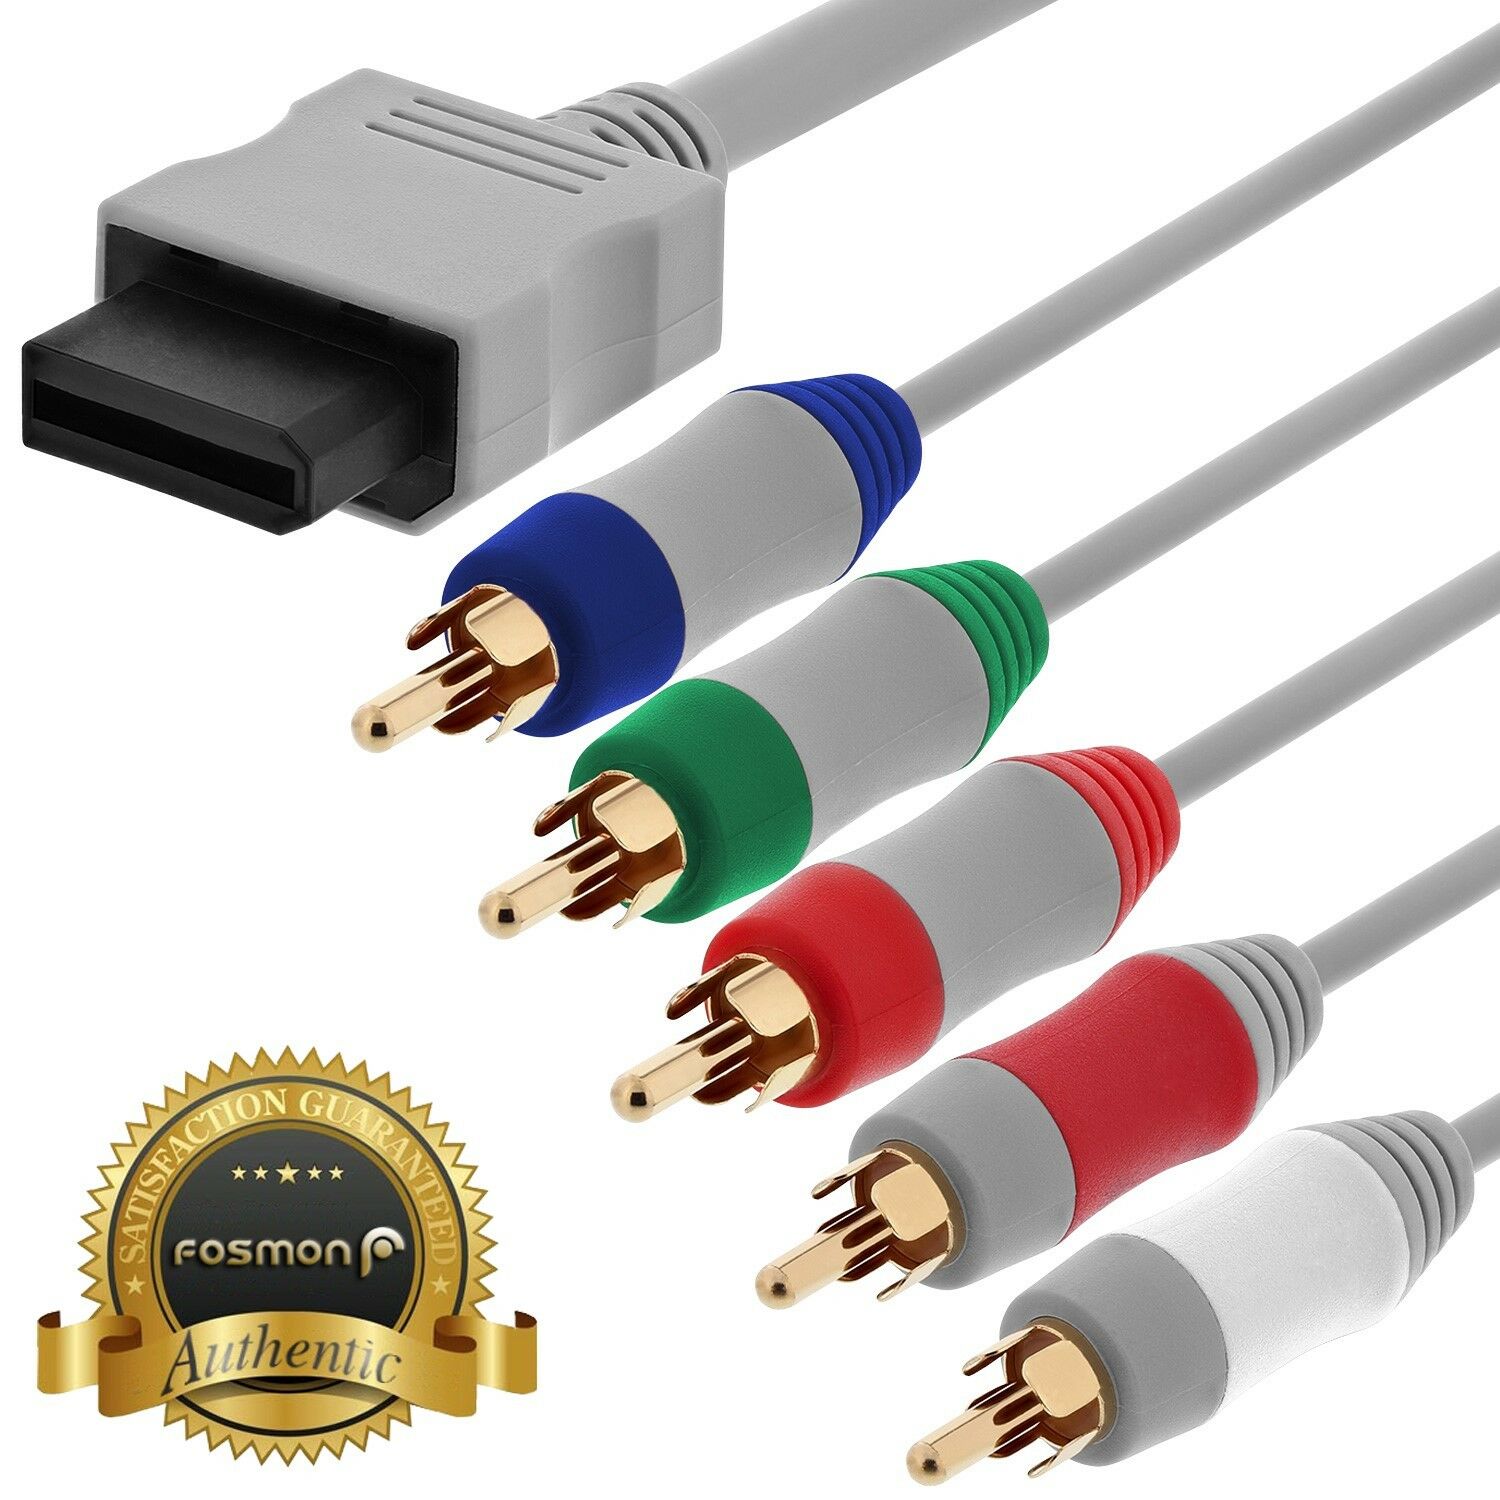 6ft Hd Tv Component Rca Audio Video Av Cable Cord Plug For Nintendo Wii U Wii